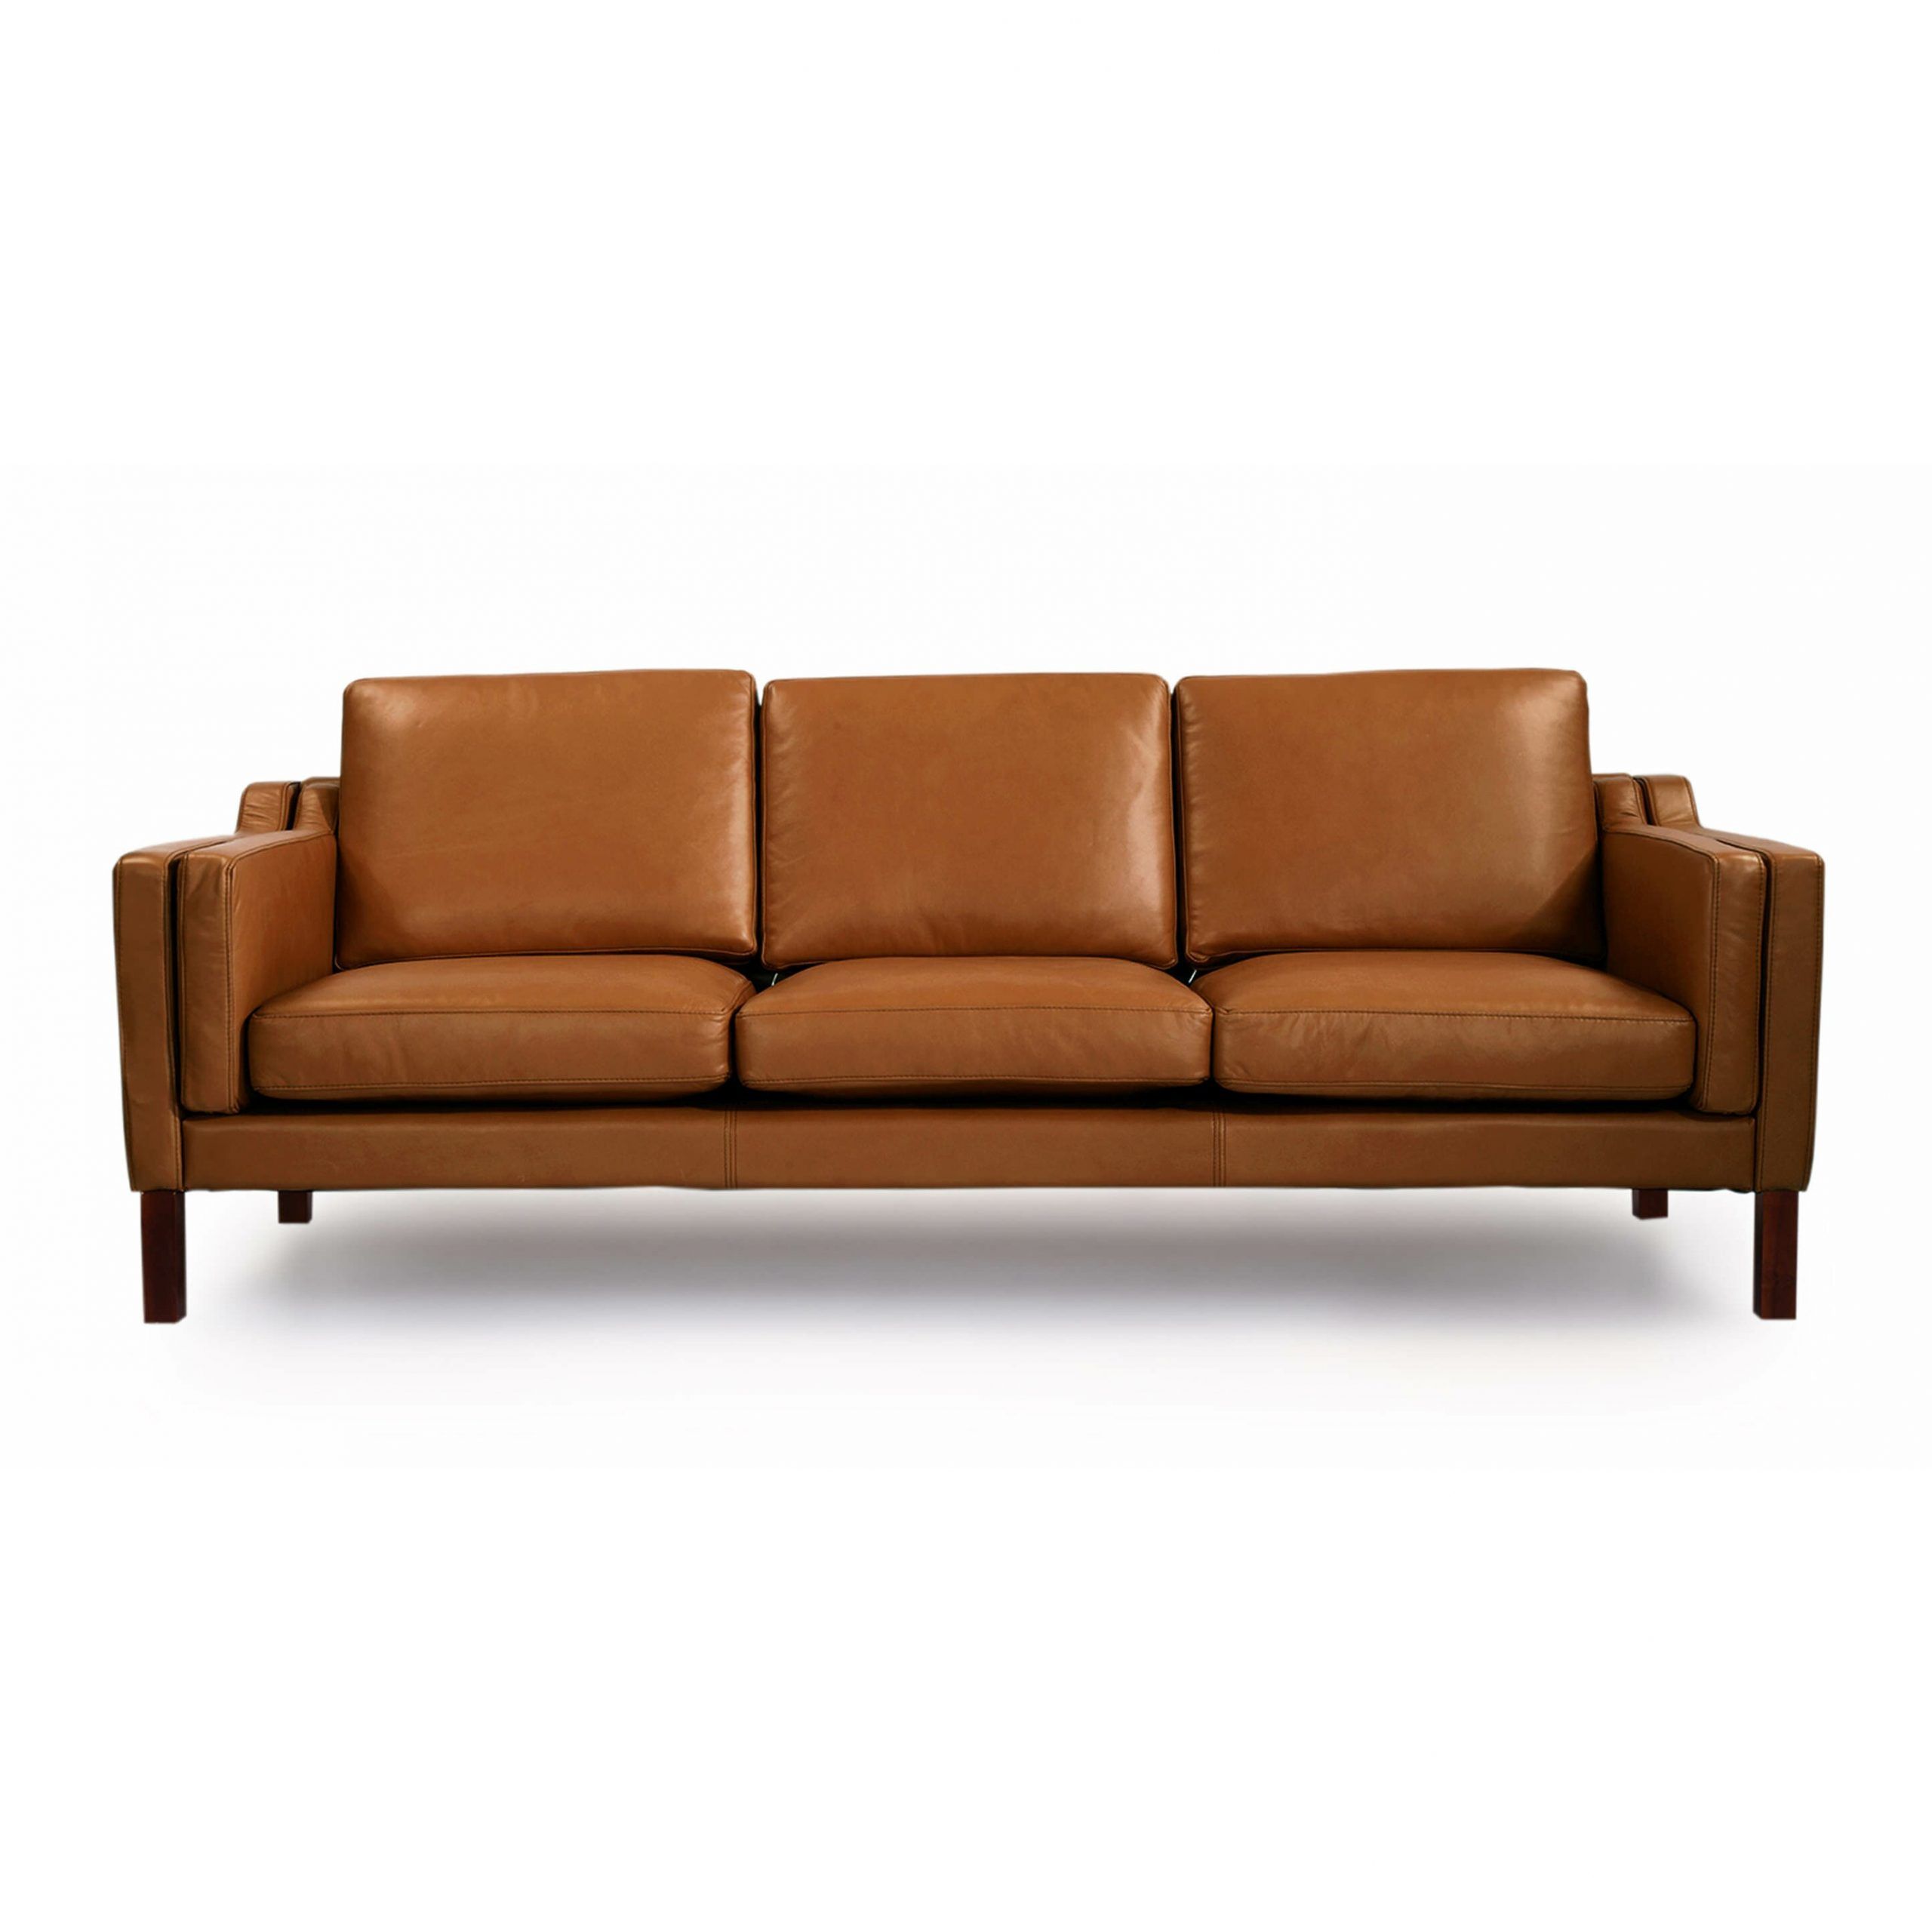 Mid Century Leather Sofa With Regard To Riley Retro Mid Century Modern Fabric Upholstered Left Facing Chaise Sectional Sofas (View 7 of 15)